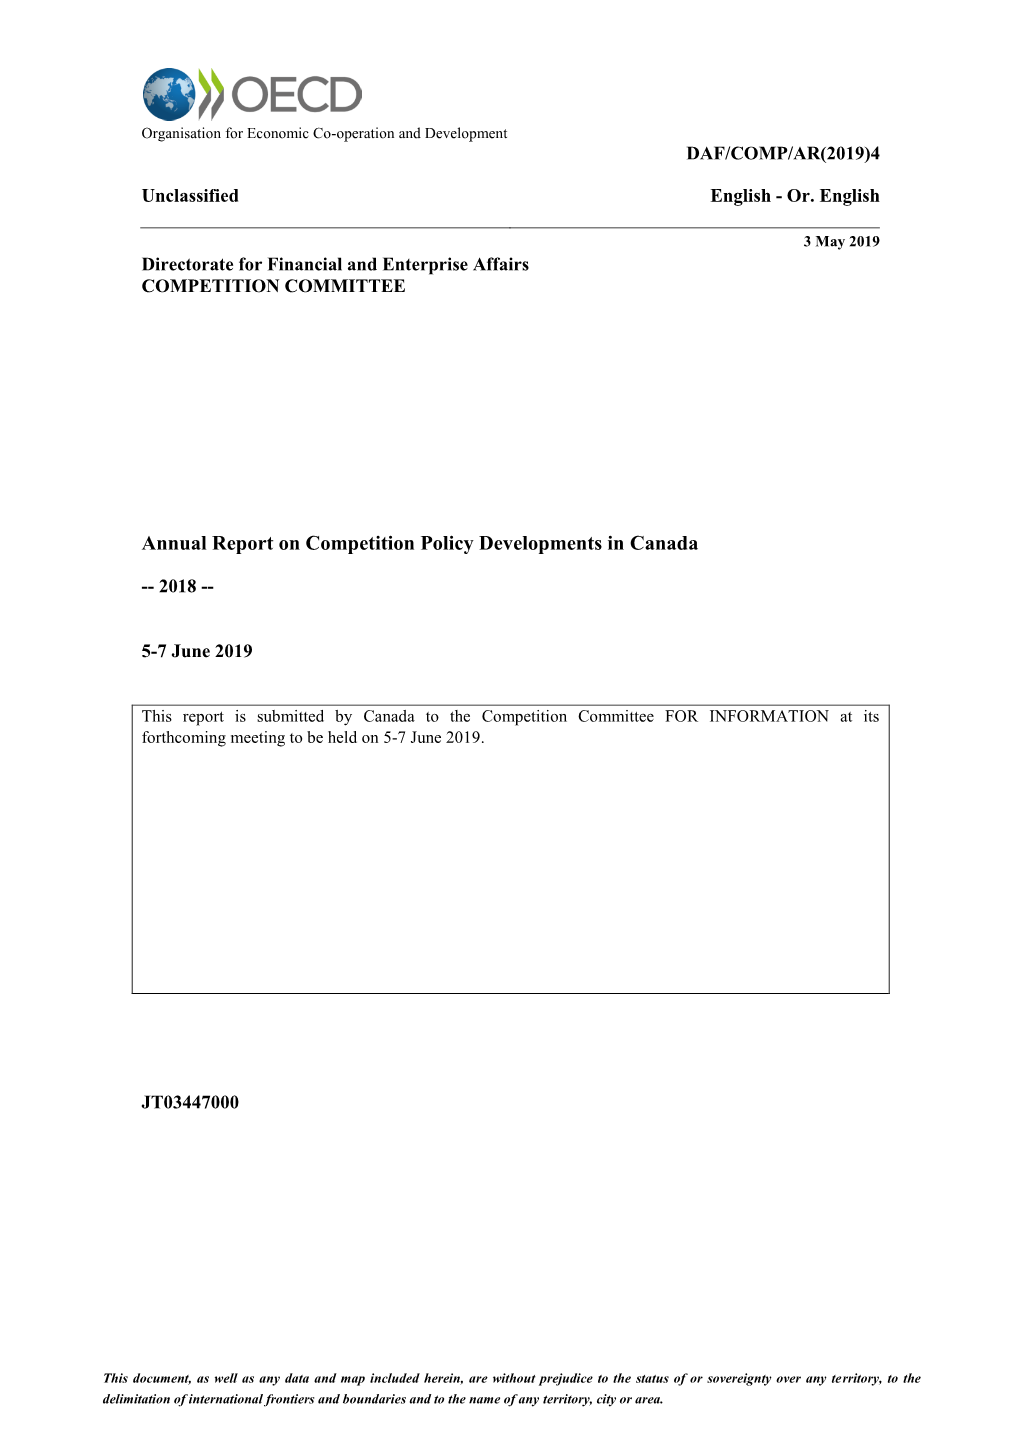 Annual Report on Competition Policy Developments in Canada